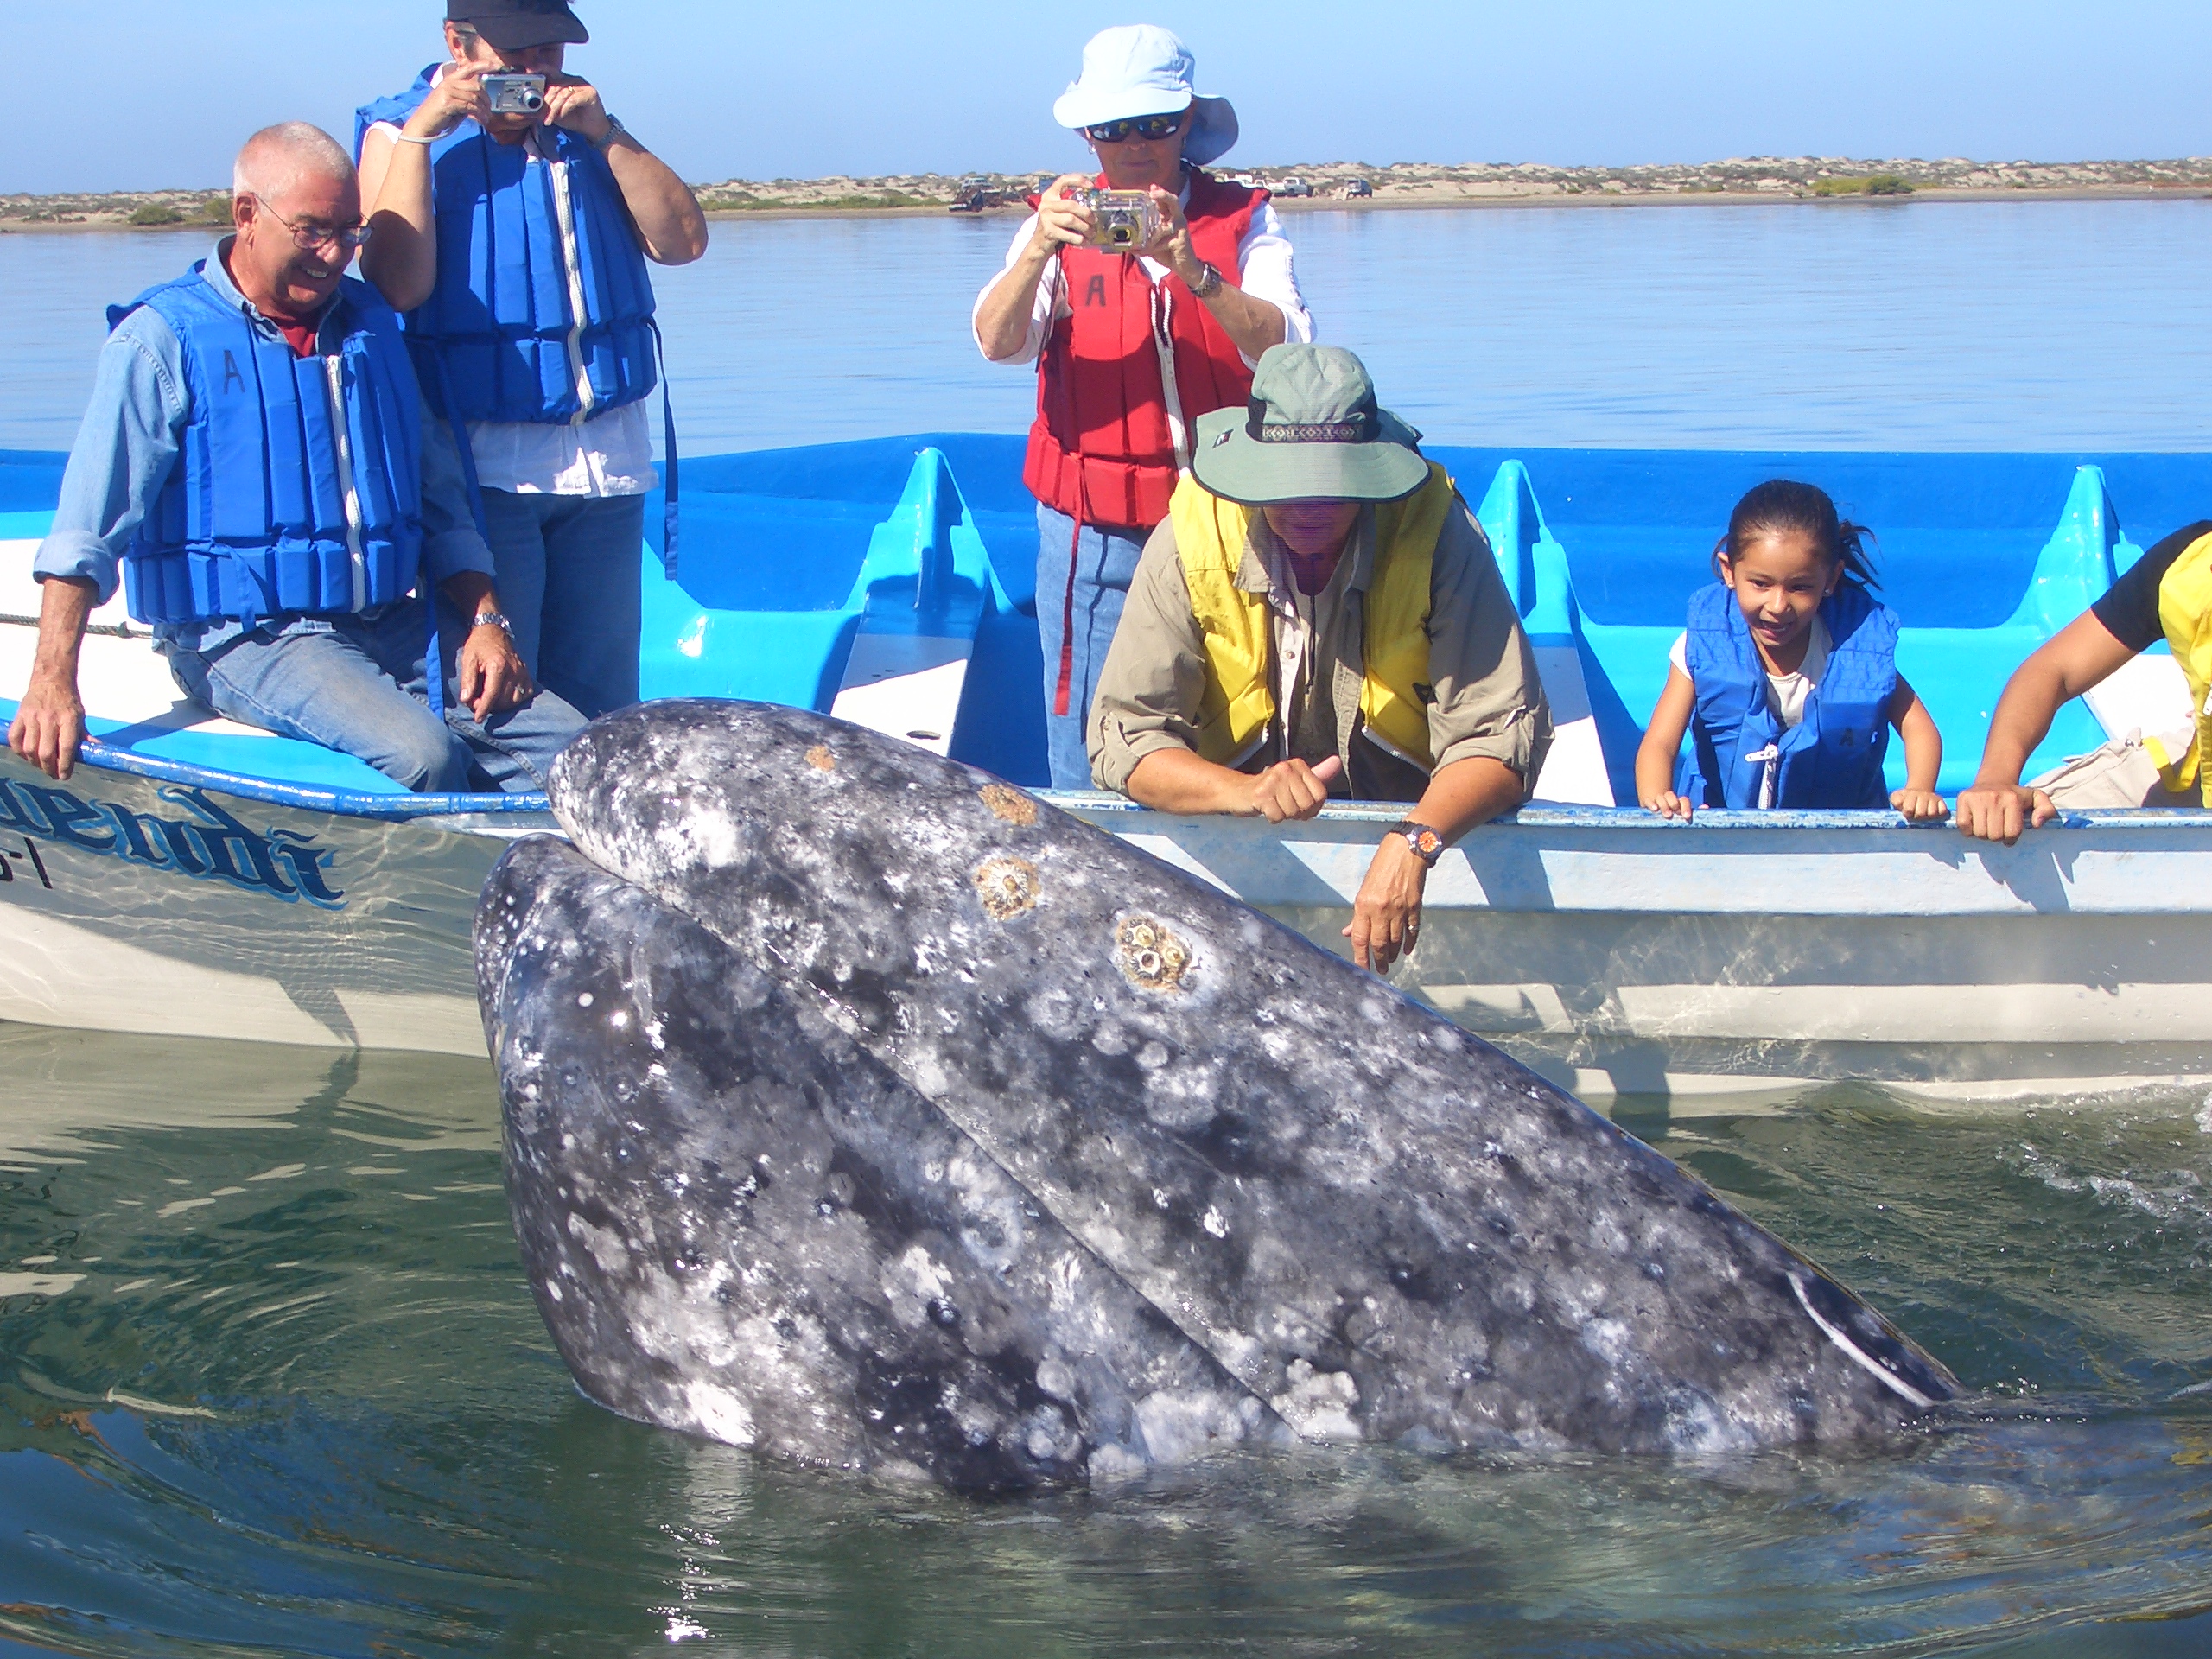 A Whale Watching Family Adventure in La Paz